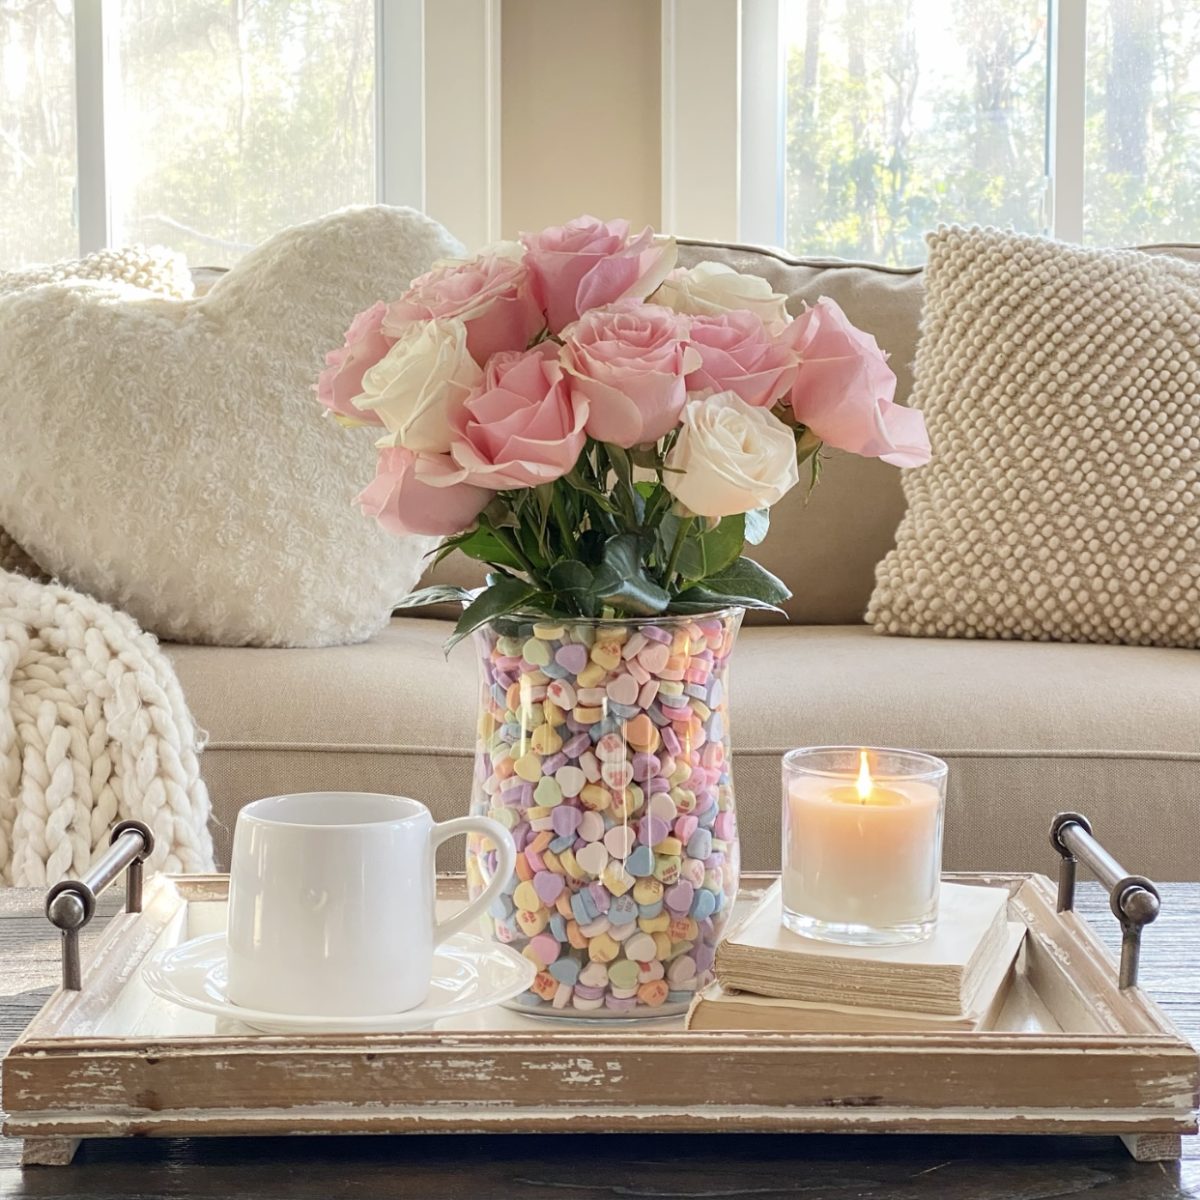 Sweet Valentine's Day floral arrangement on the coffee table with a candle, books and a cup of coffee. 